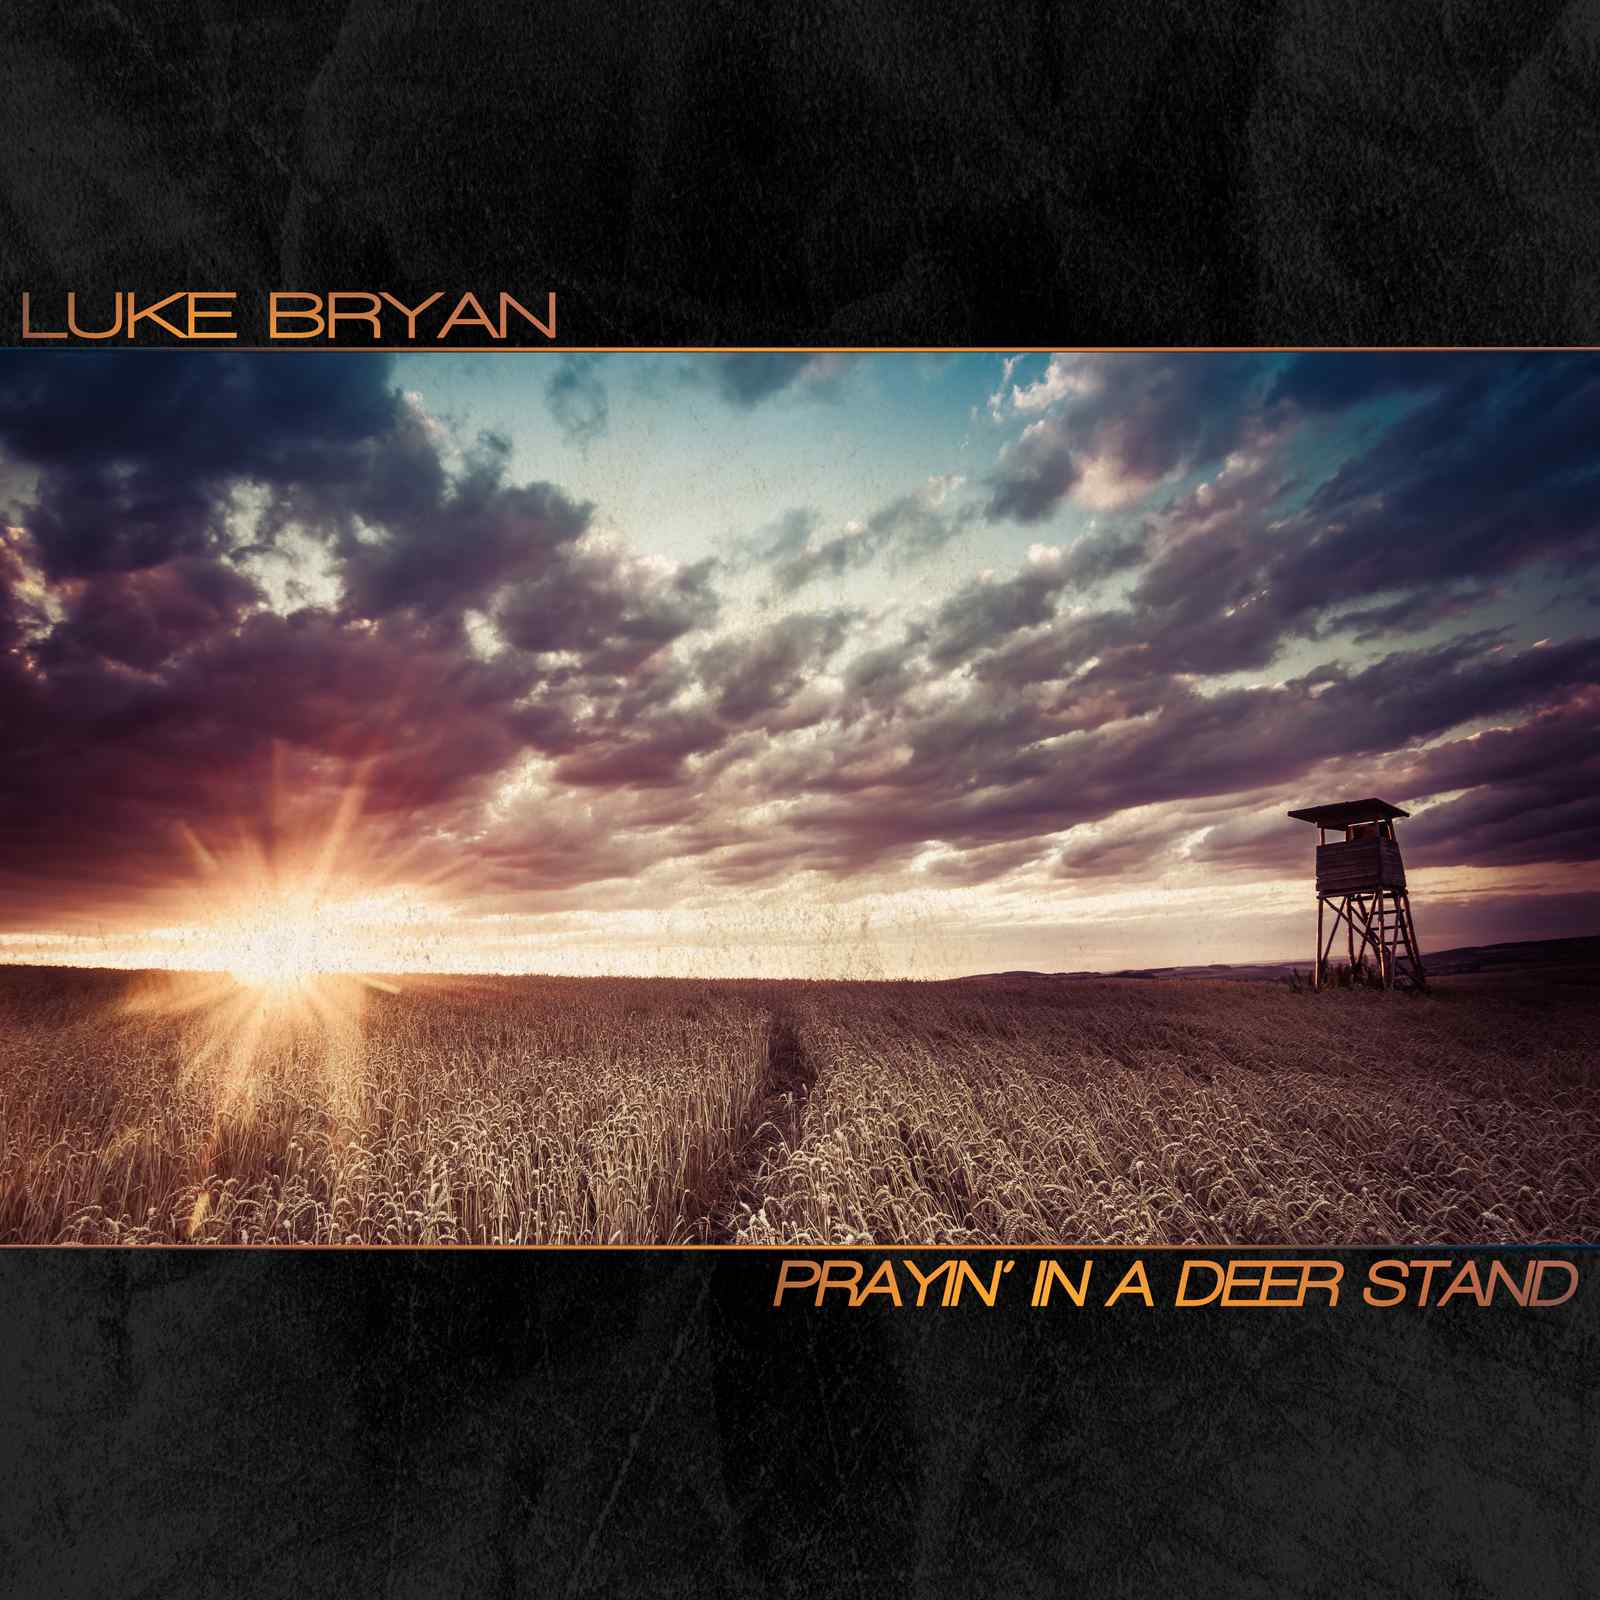 Luke Bryan Releases New Song Today  “Prayin’ In A Deer Stand”